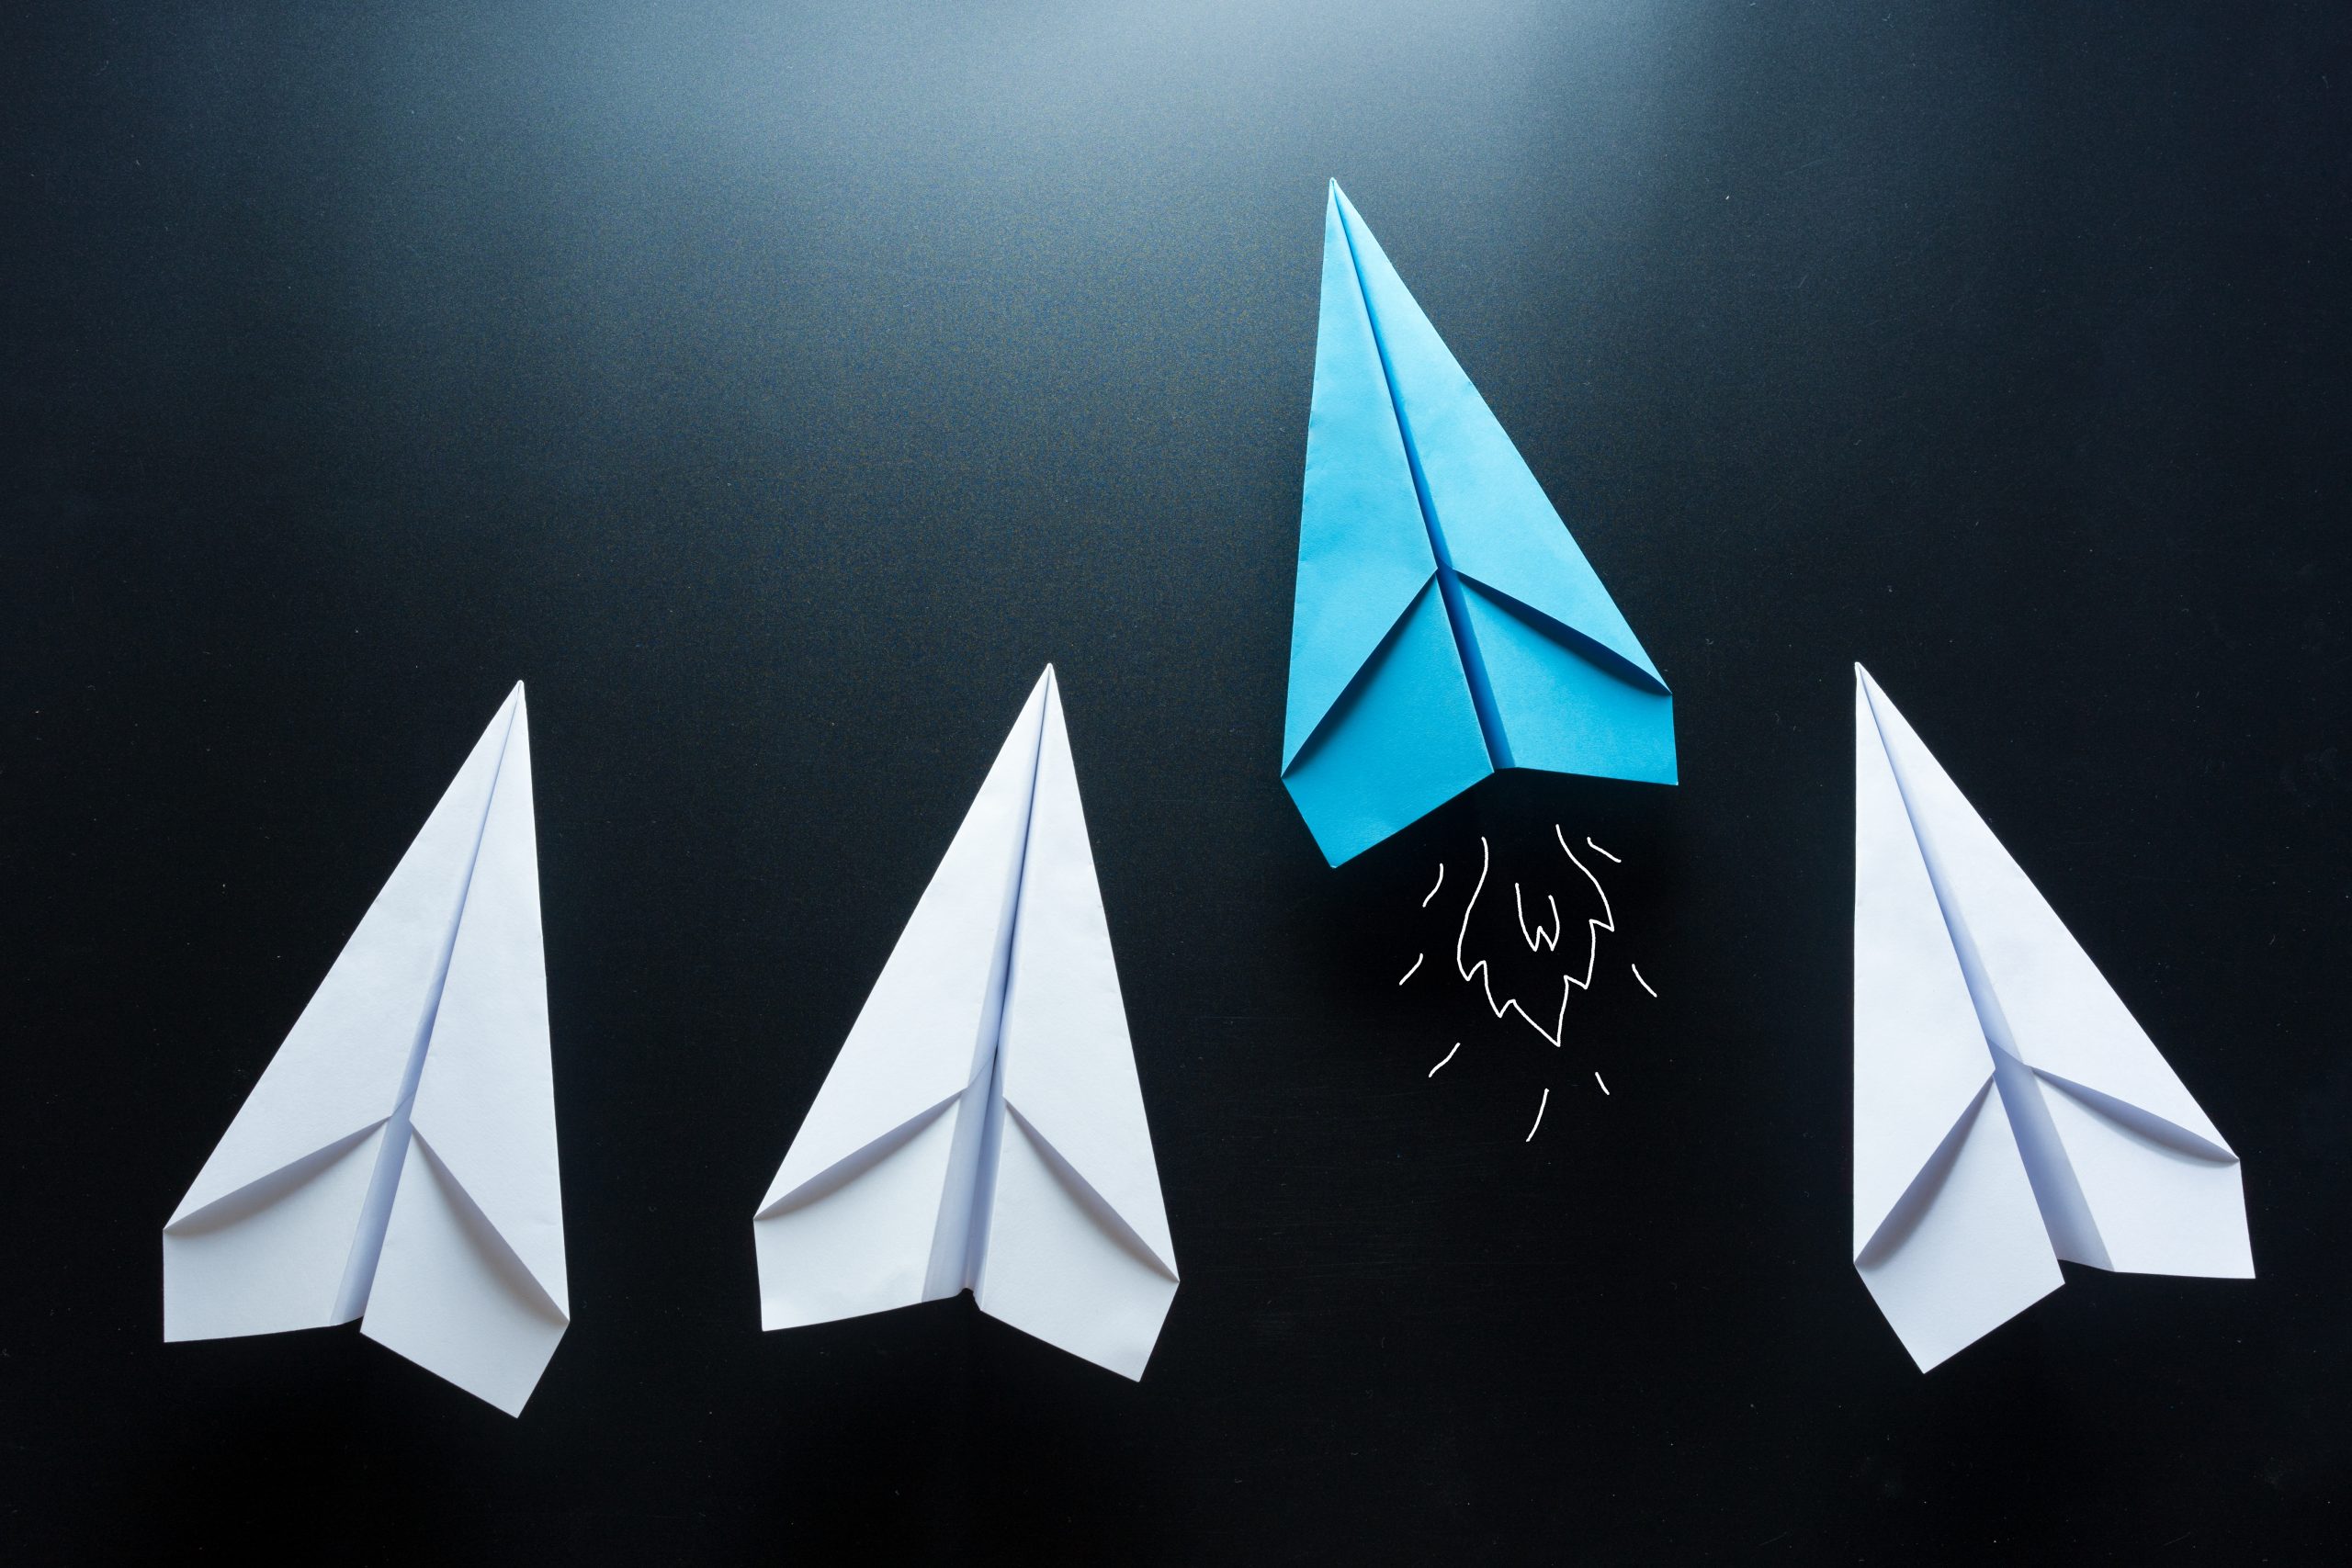 Four paper airplanes representing market-driven yields.